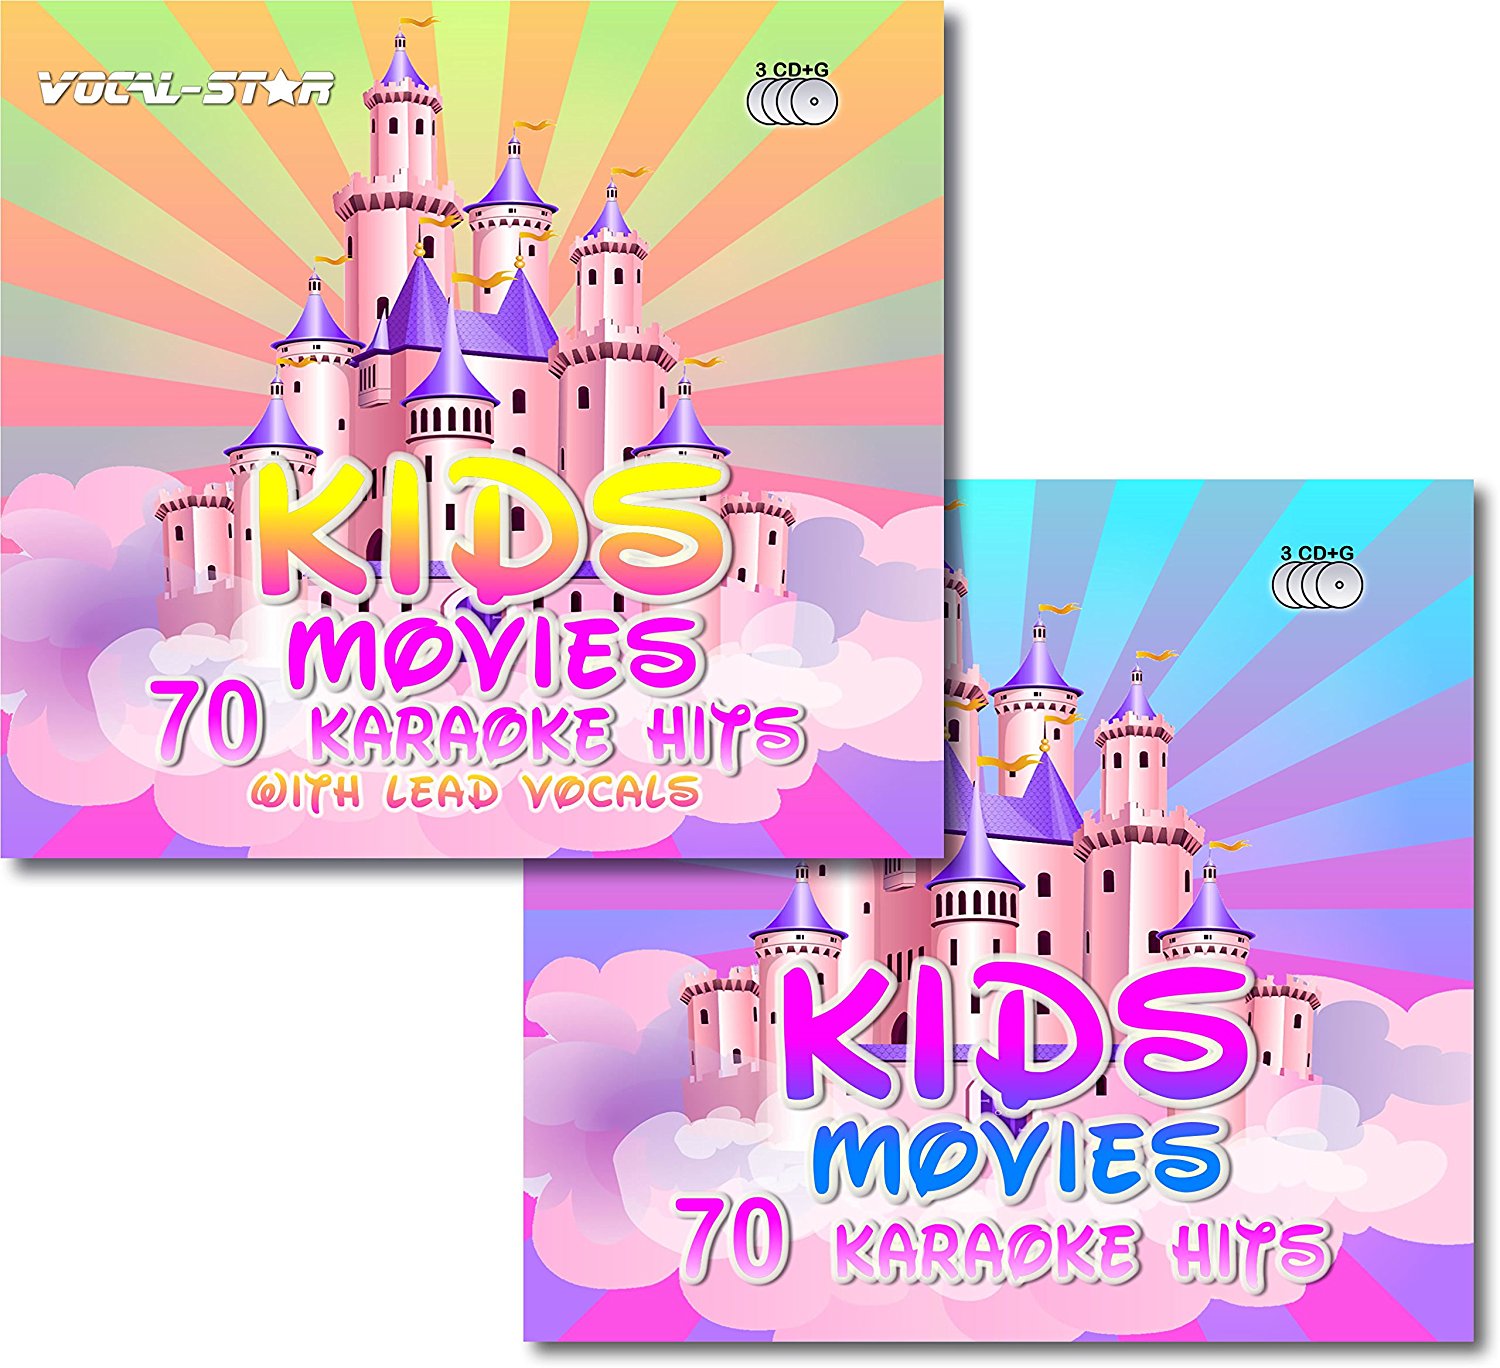 Vocal-Star Karaoke Kids Movies 6 CDG Disc Bundle 140 Songs (70 With Lead Vocals)